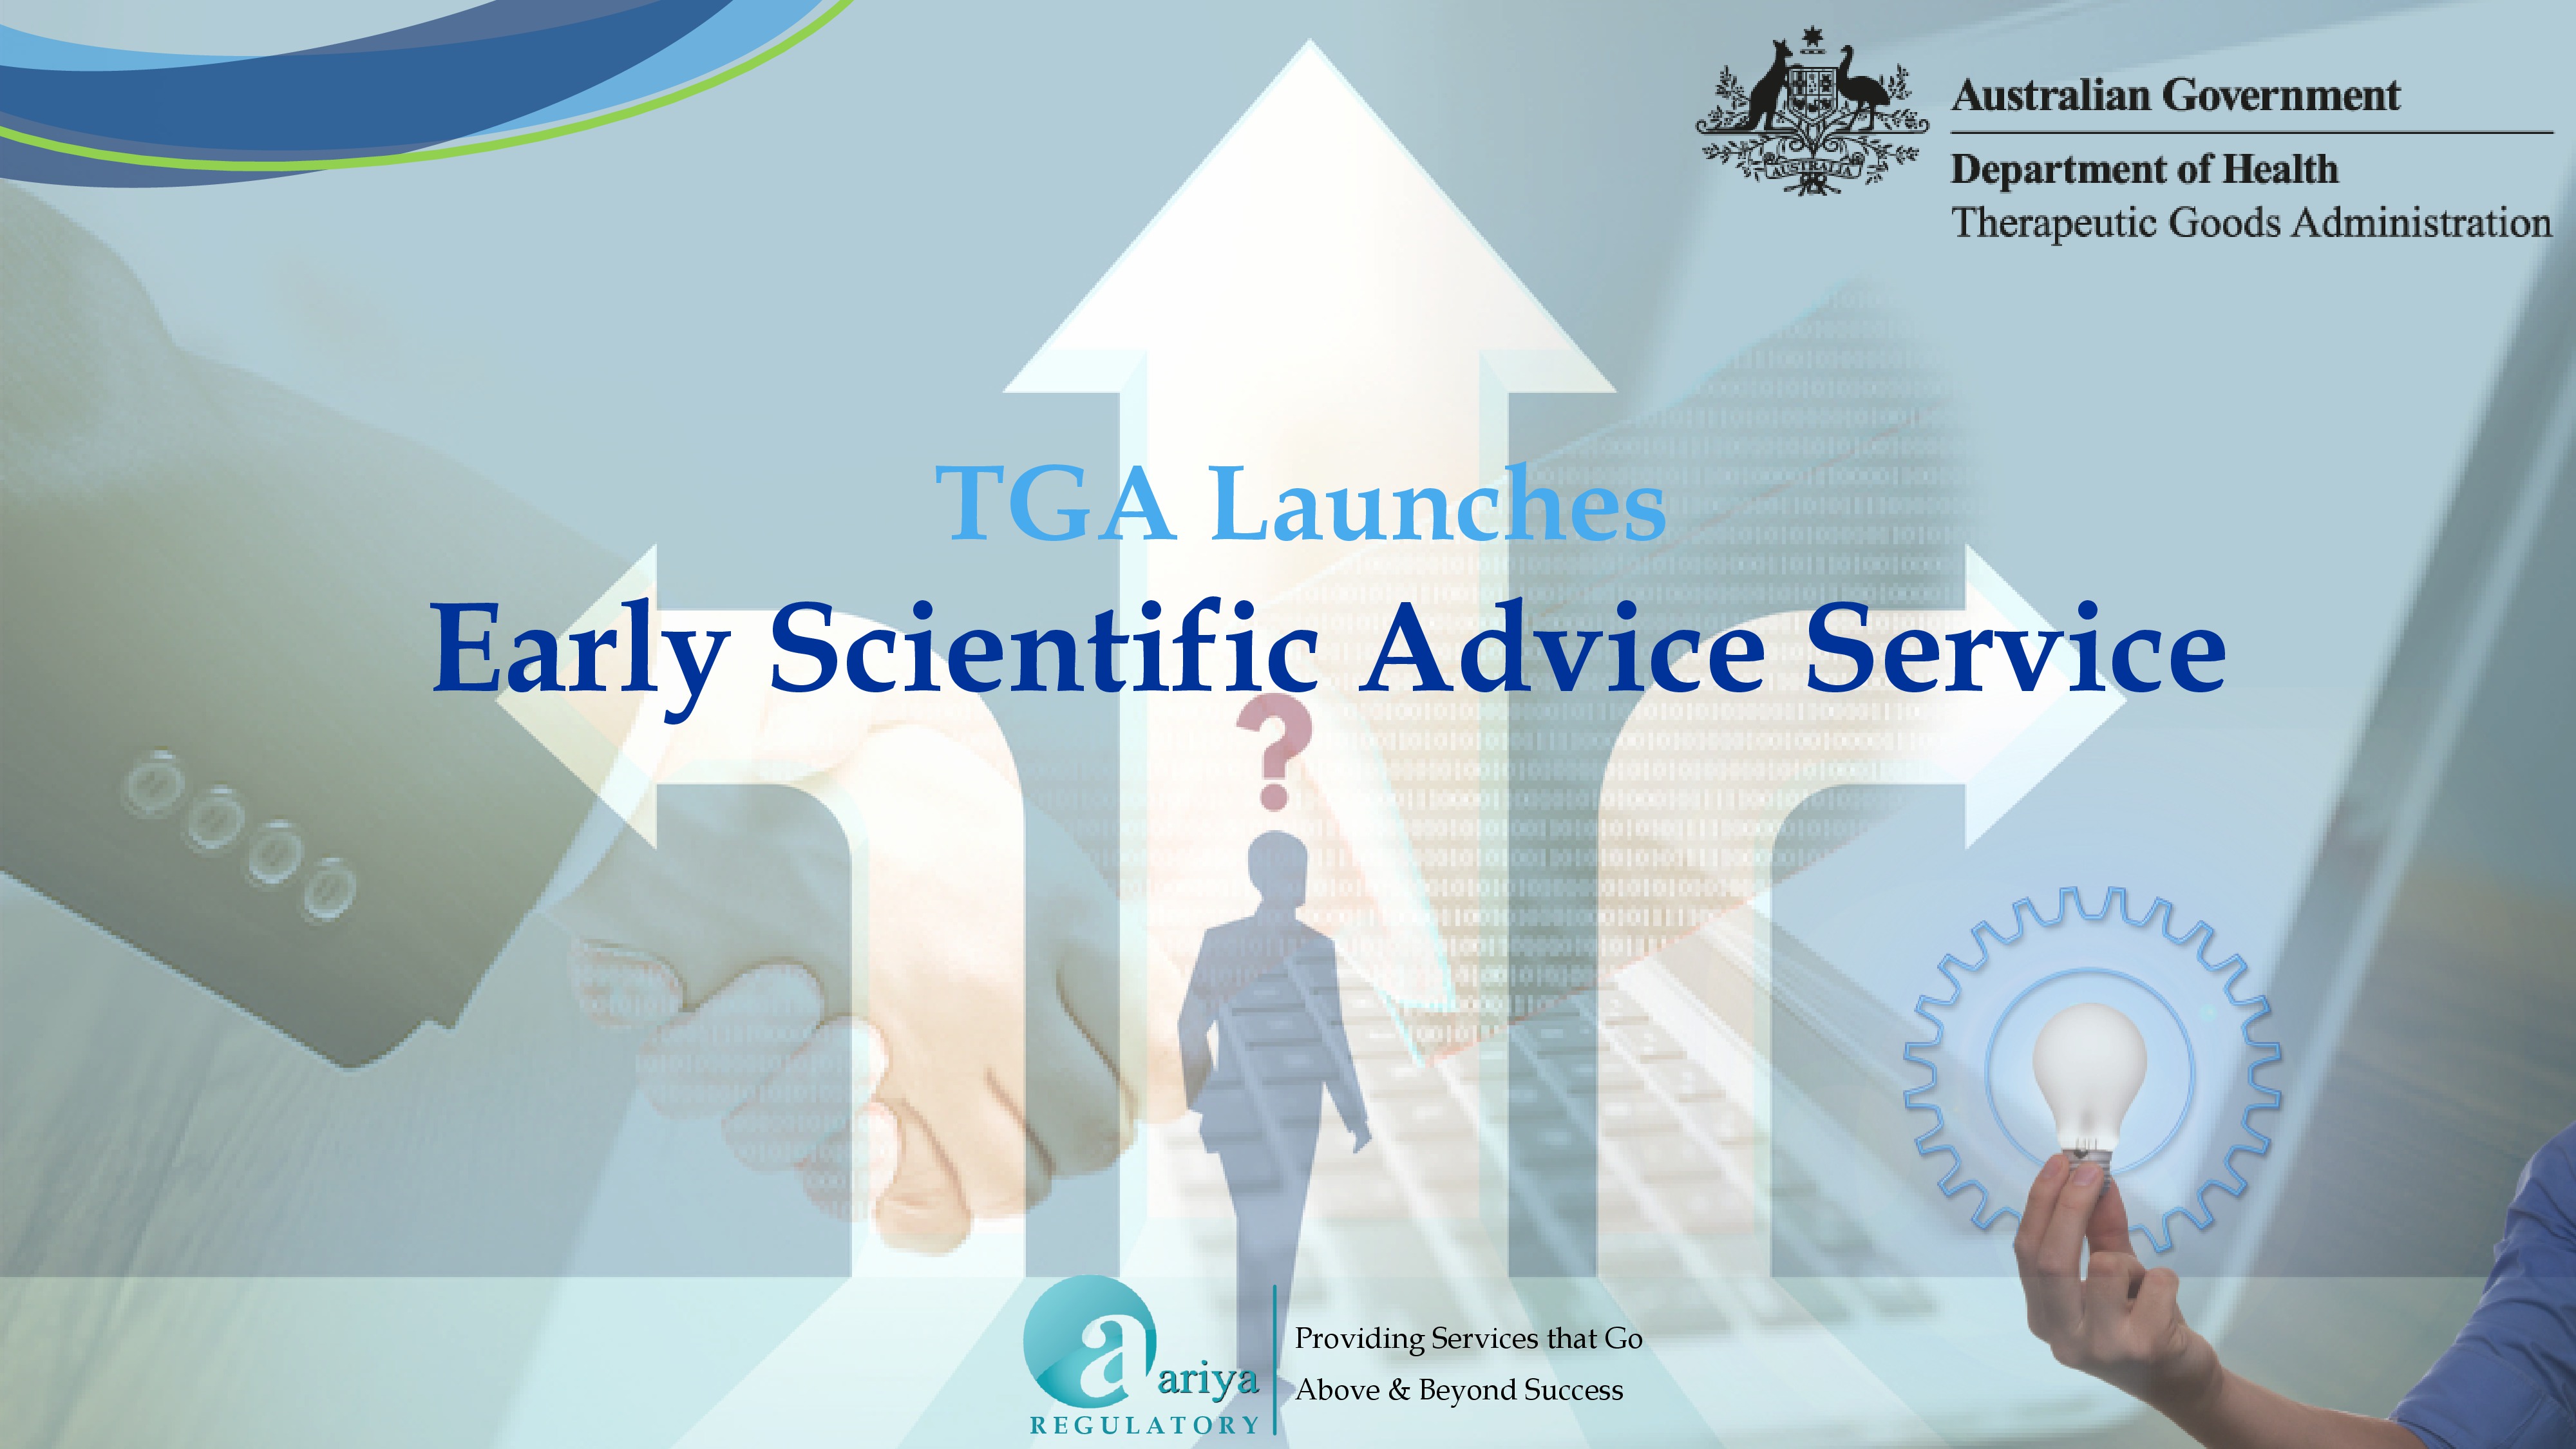 TGA Launches Early Scientific Advice Service